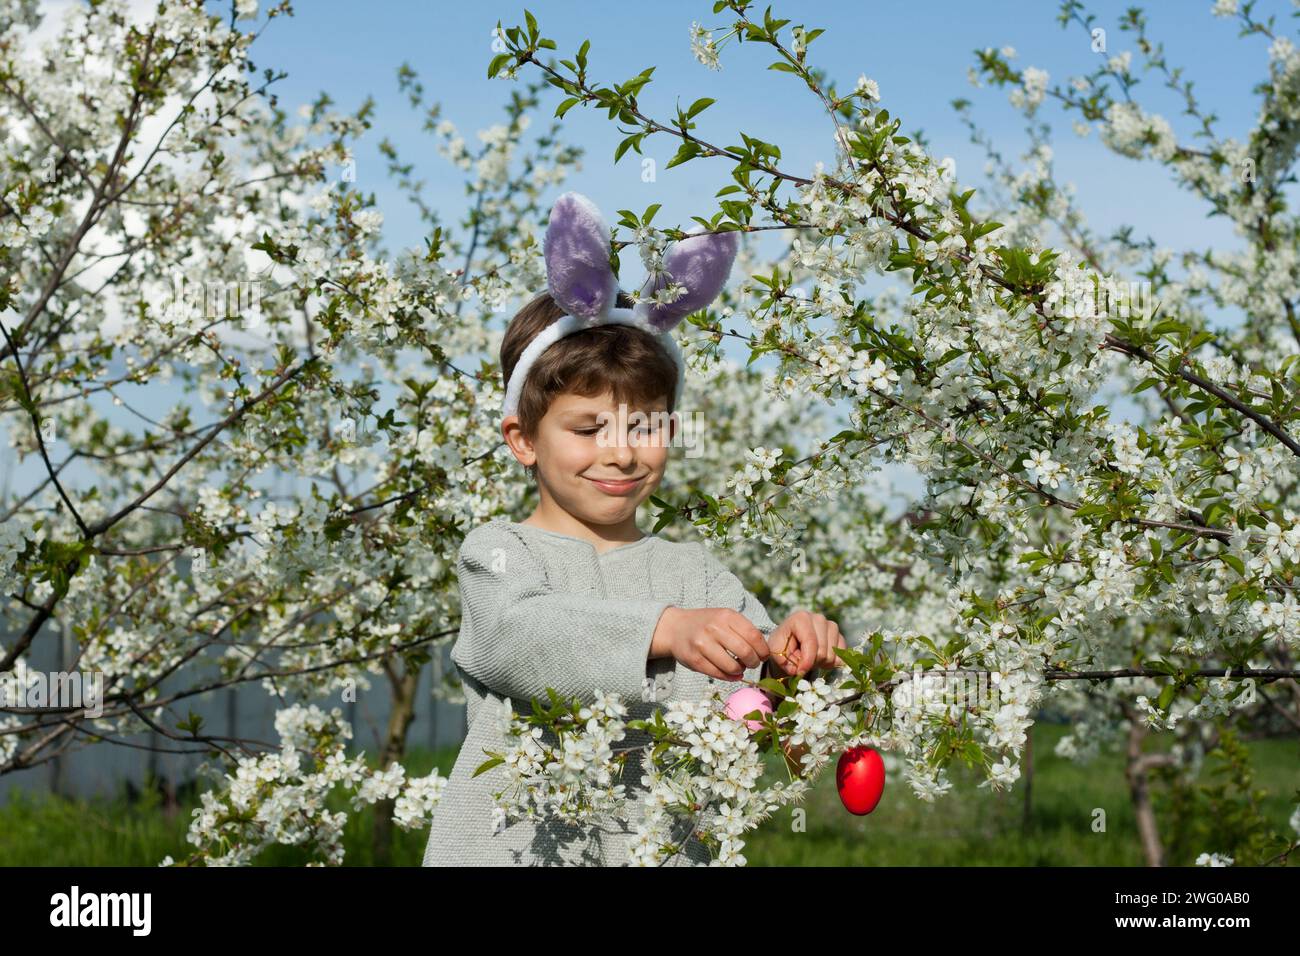 Easter egg hunt. preschool boy wearing bunny ears finding colorful eggs on Easter egg hunt in garden. child decorating branches of flowering tree with Stock Photo